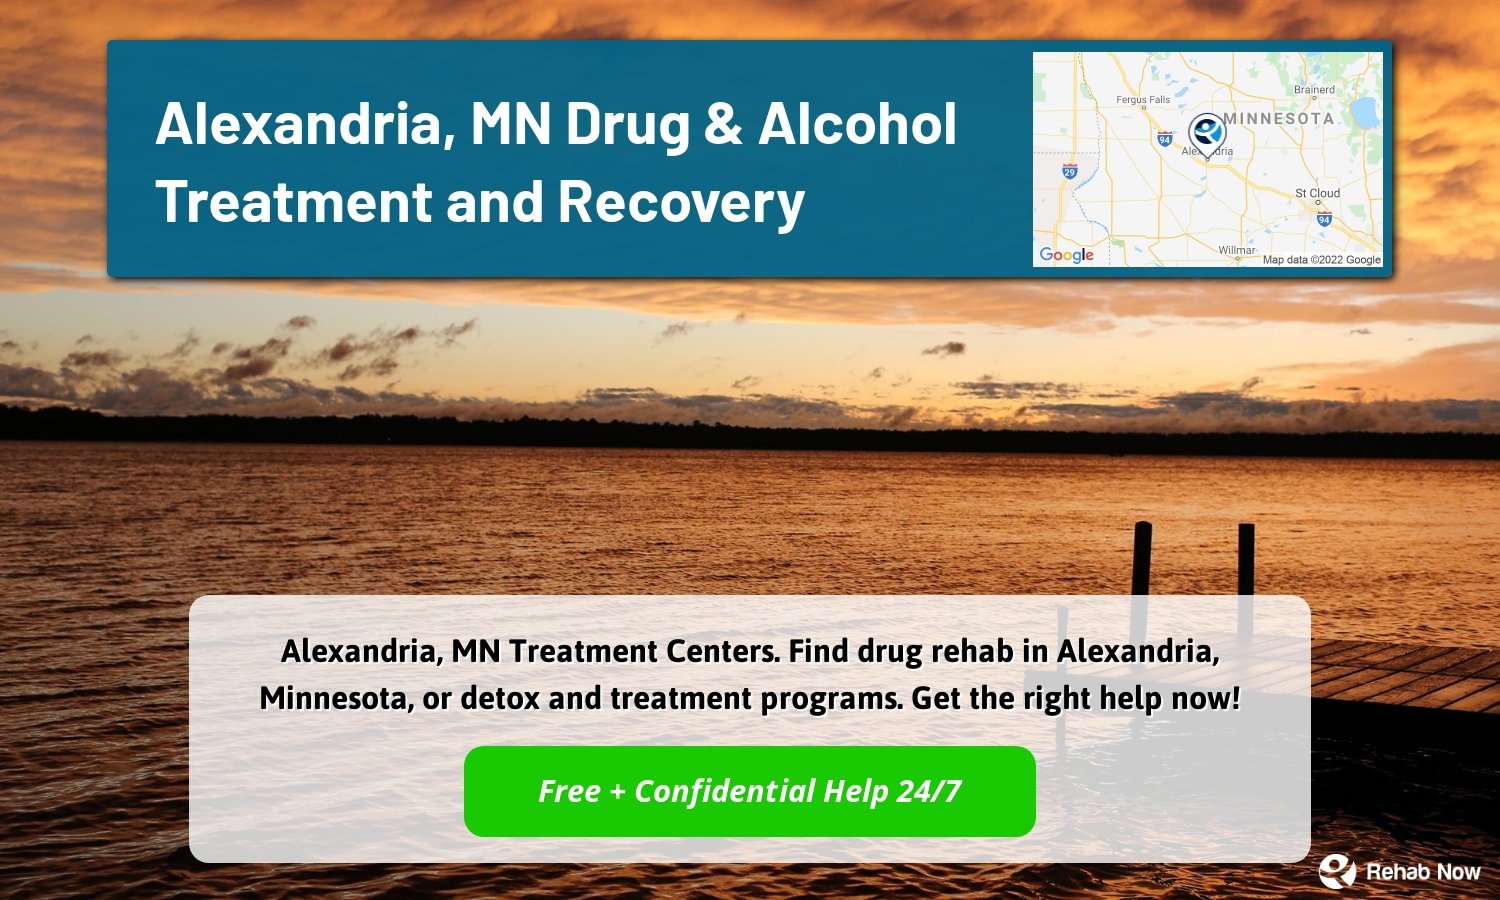 Alexandria, MN Treatment Centers. Find drug rehab in Alexandria, Minnesota, or detox and treatment programs. Get the right help now!